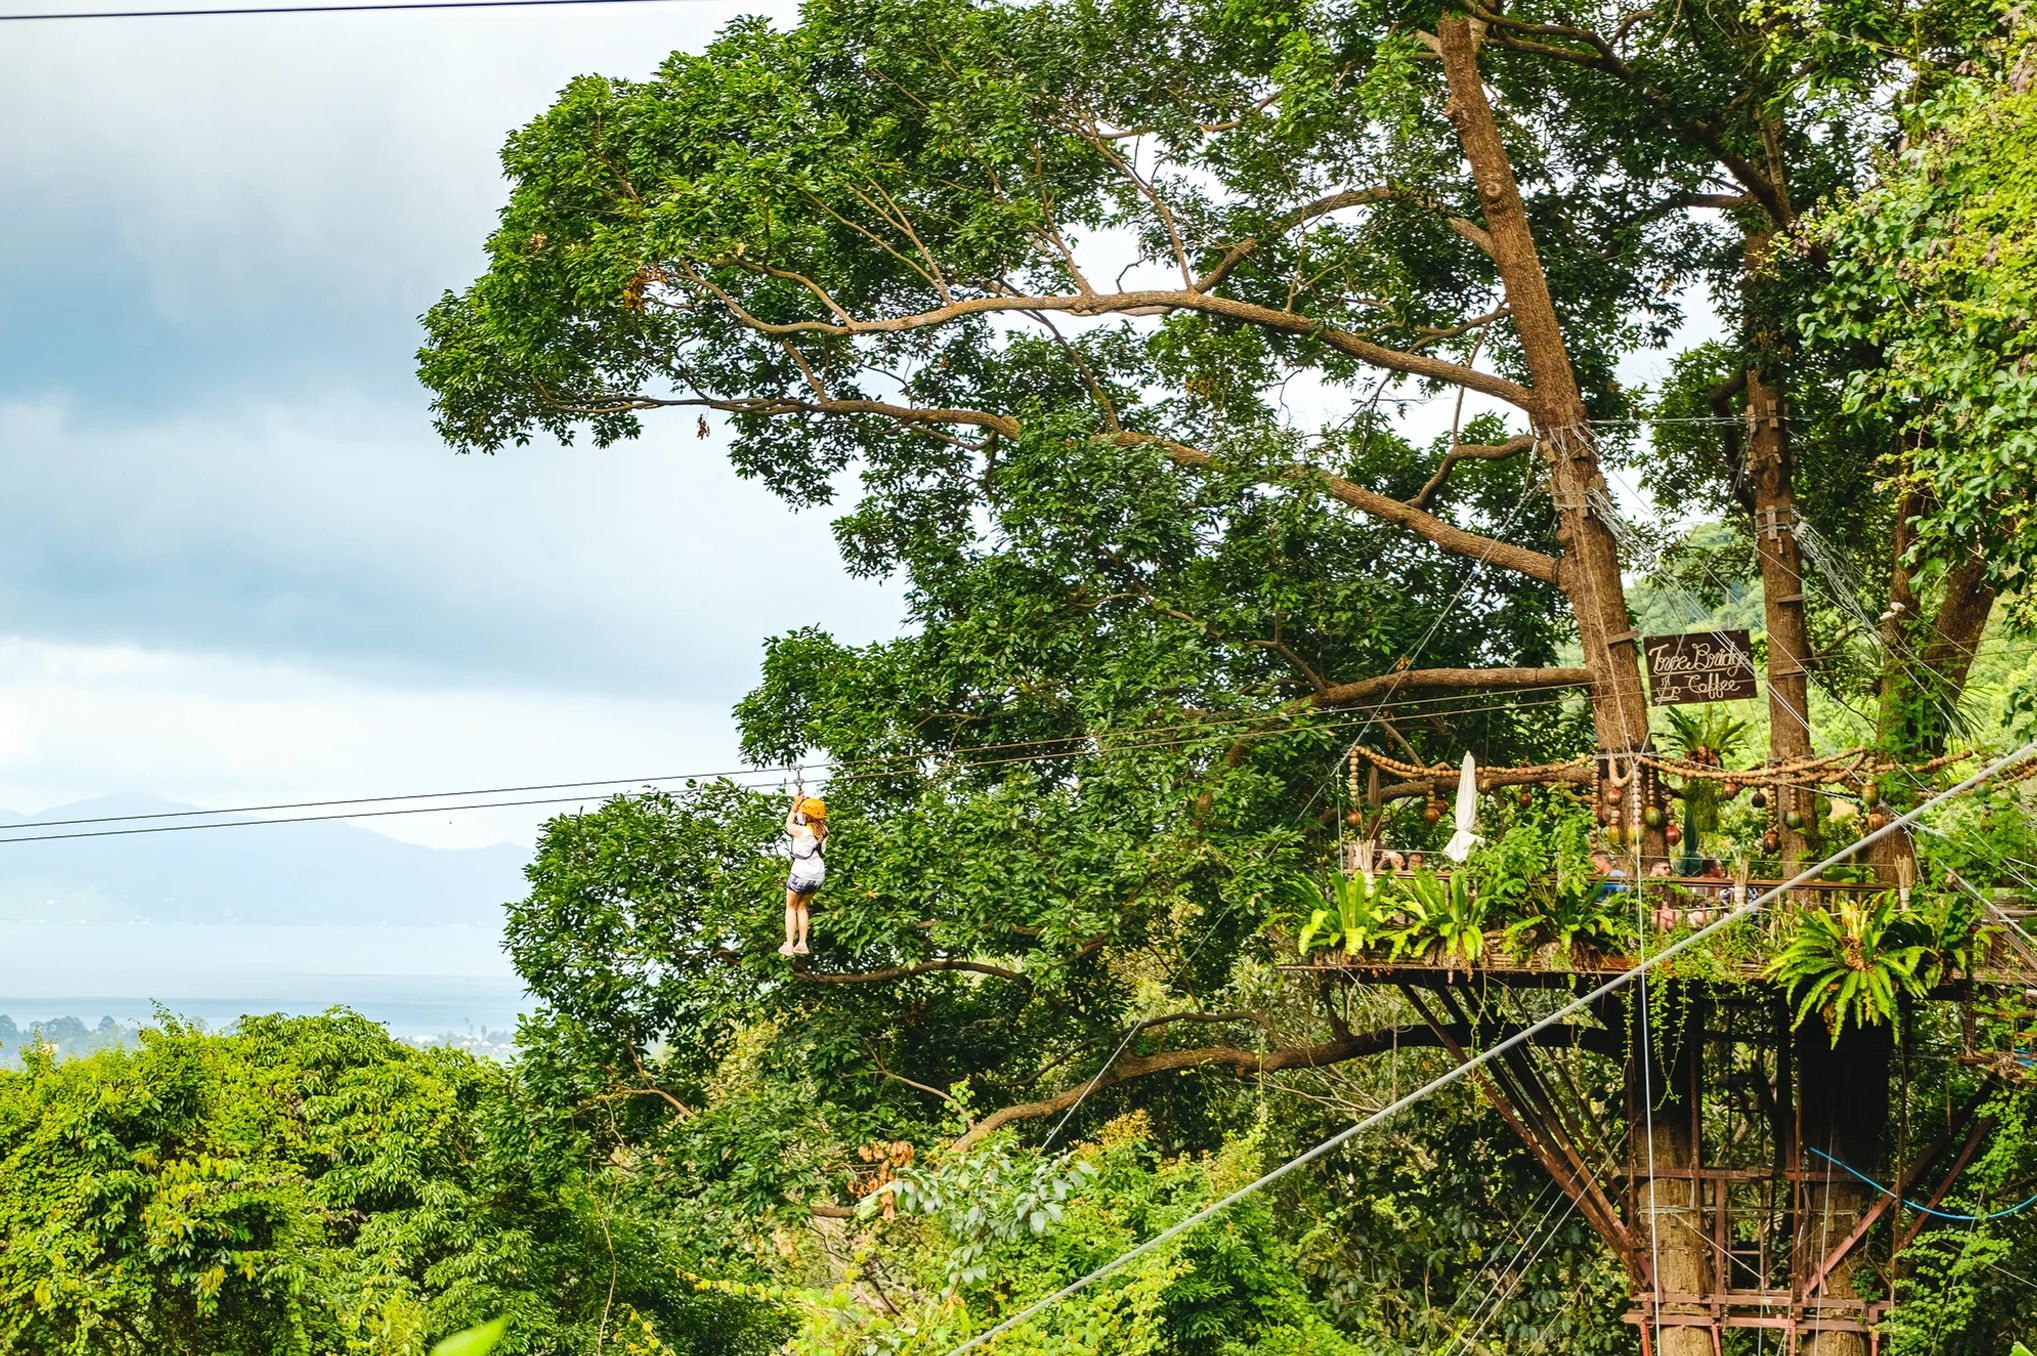 A person leaving a zipline station on a treetop zipline in Koh Samui. One of the most adventurous places to propose in Thailand.